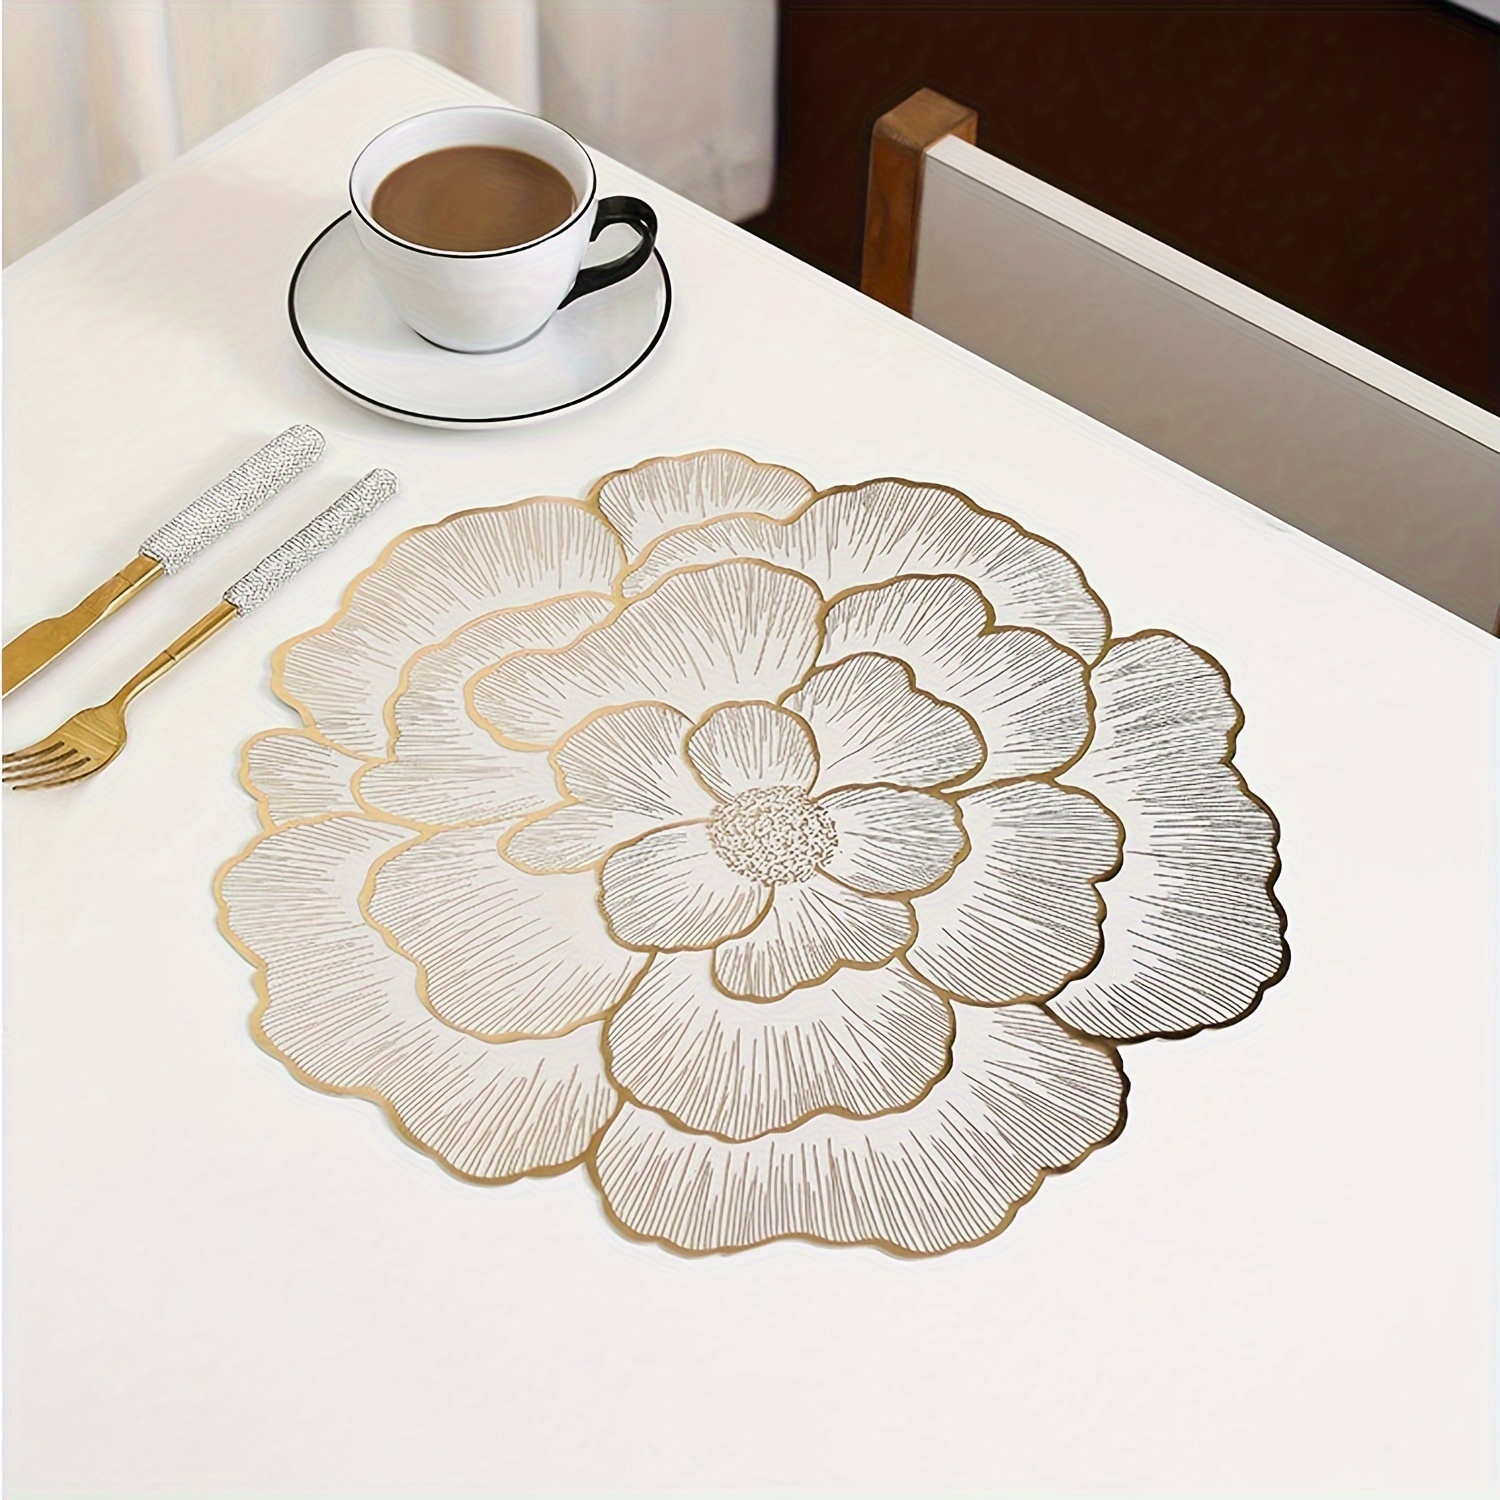 

waterproof" Elegant Gold Floral Vinyl Placemats Set Of 6 - Non-slip, Wipeable Round Table Mats For Dining & Special Occasions